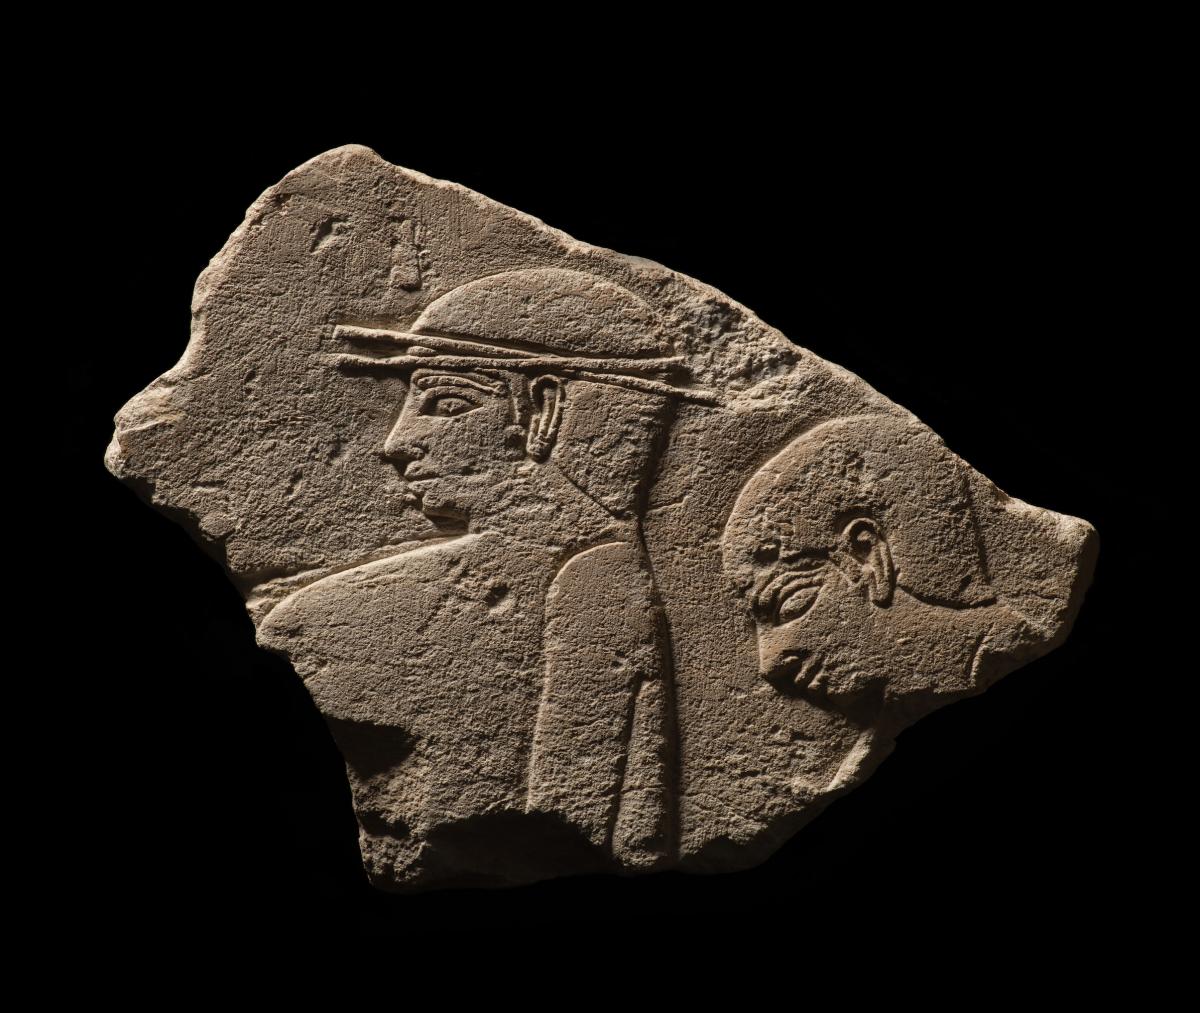 Egyptian relief fragment, Old Kingdom, late 5th Dynasty, c.2400 BC